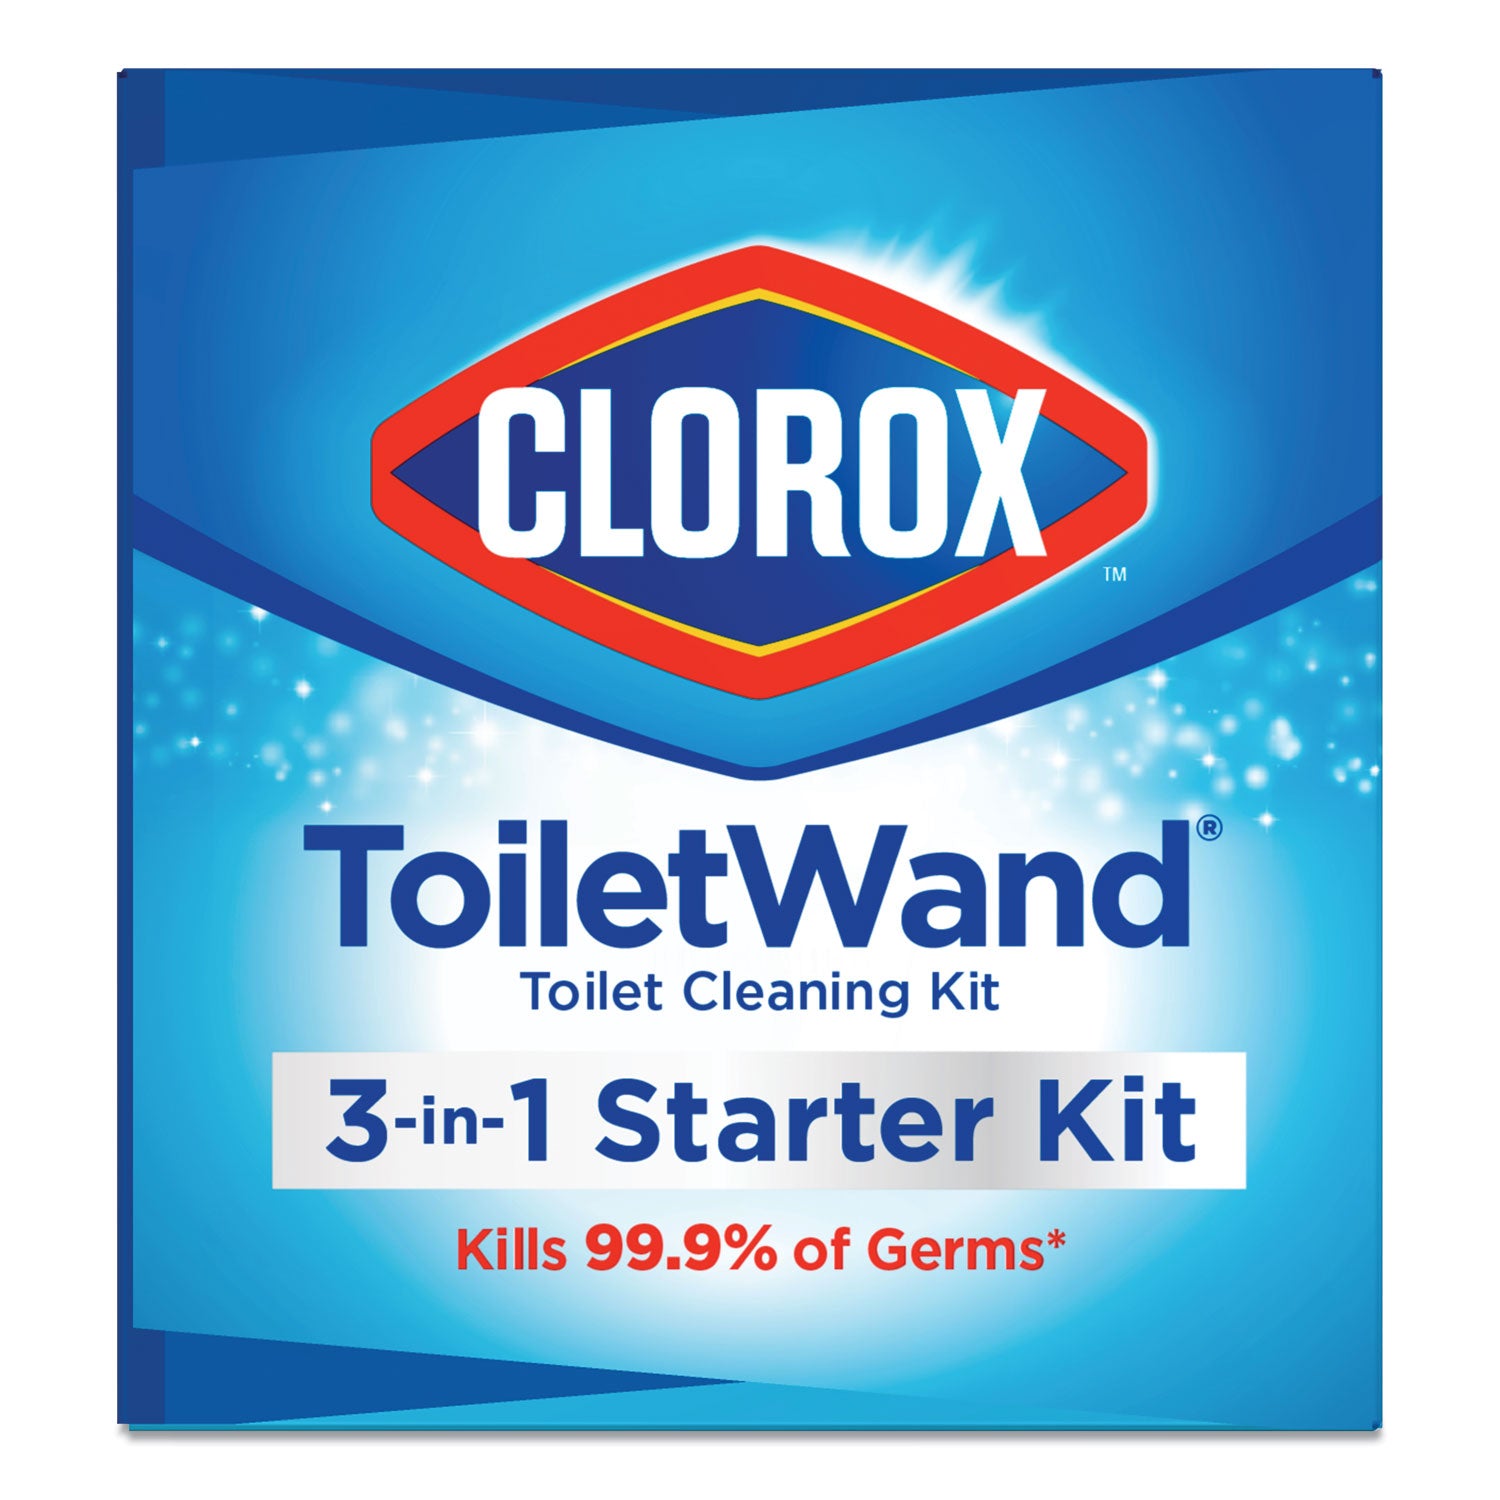 ToiletWand Disposable Toilet Cleaning System: Handle, Caddy and Refills, White, 6/Carton - 